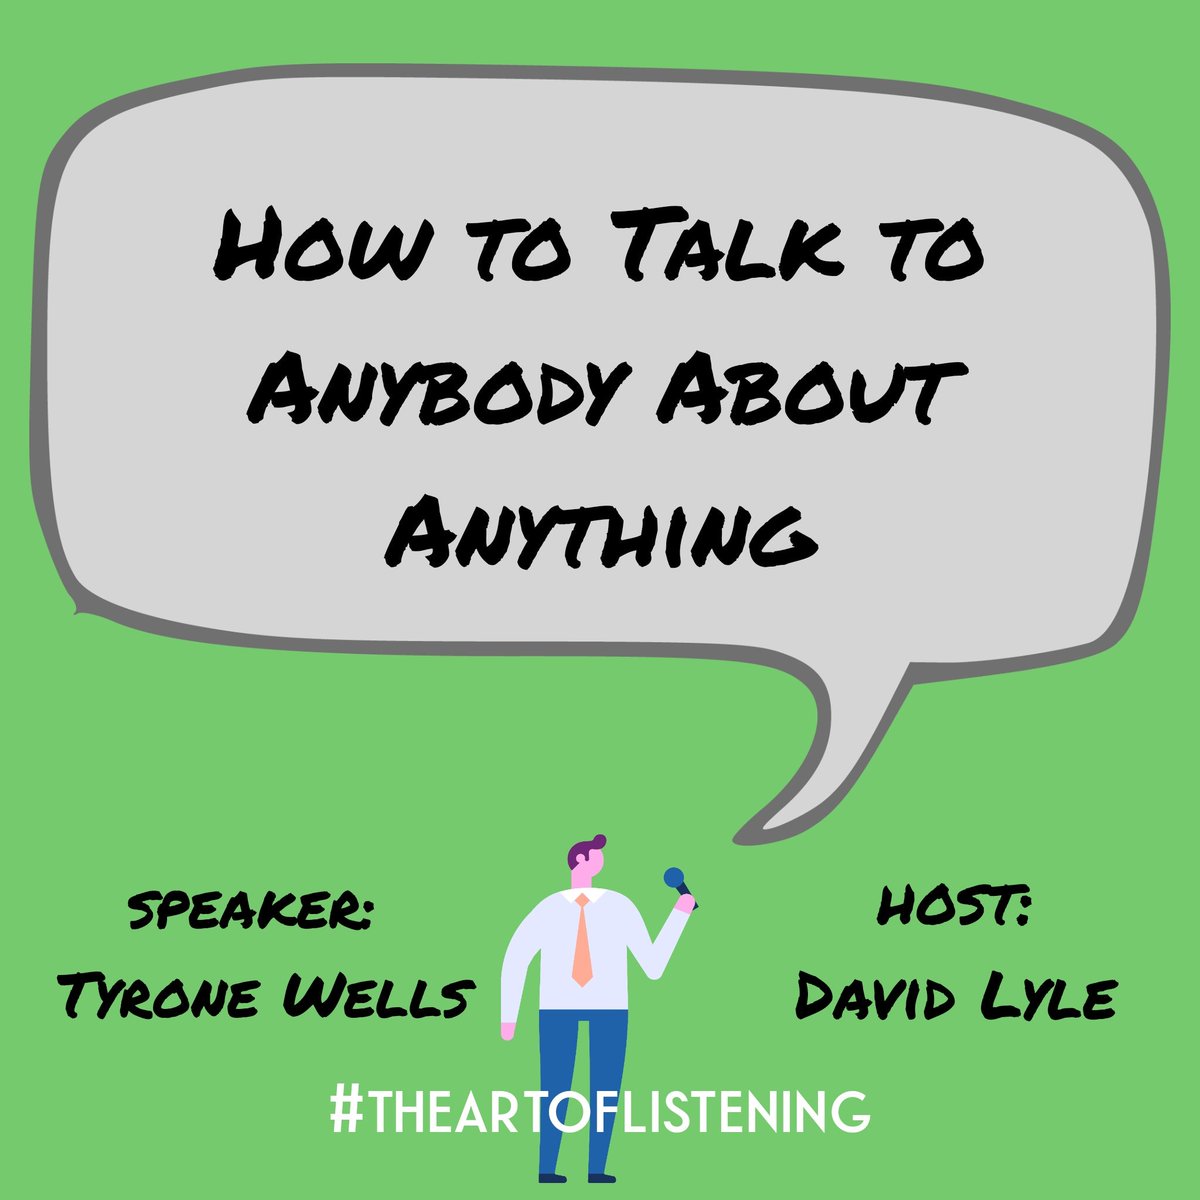 On June 9th at 10:30, we'll be hearing from Dr. Tyrone Wells on #theartoflistening. Please join us for assembly and a potluck lunch afterward at East Park Community Center! #sundayassembly #sundayassemblynashville #community #secular #livebetter #helpoften #wondermore